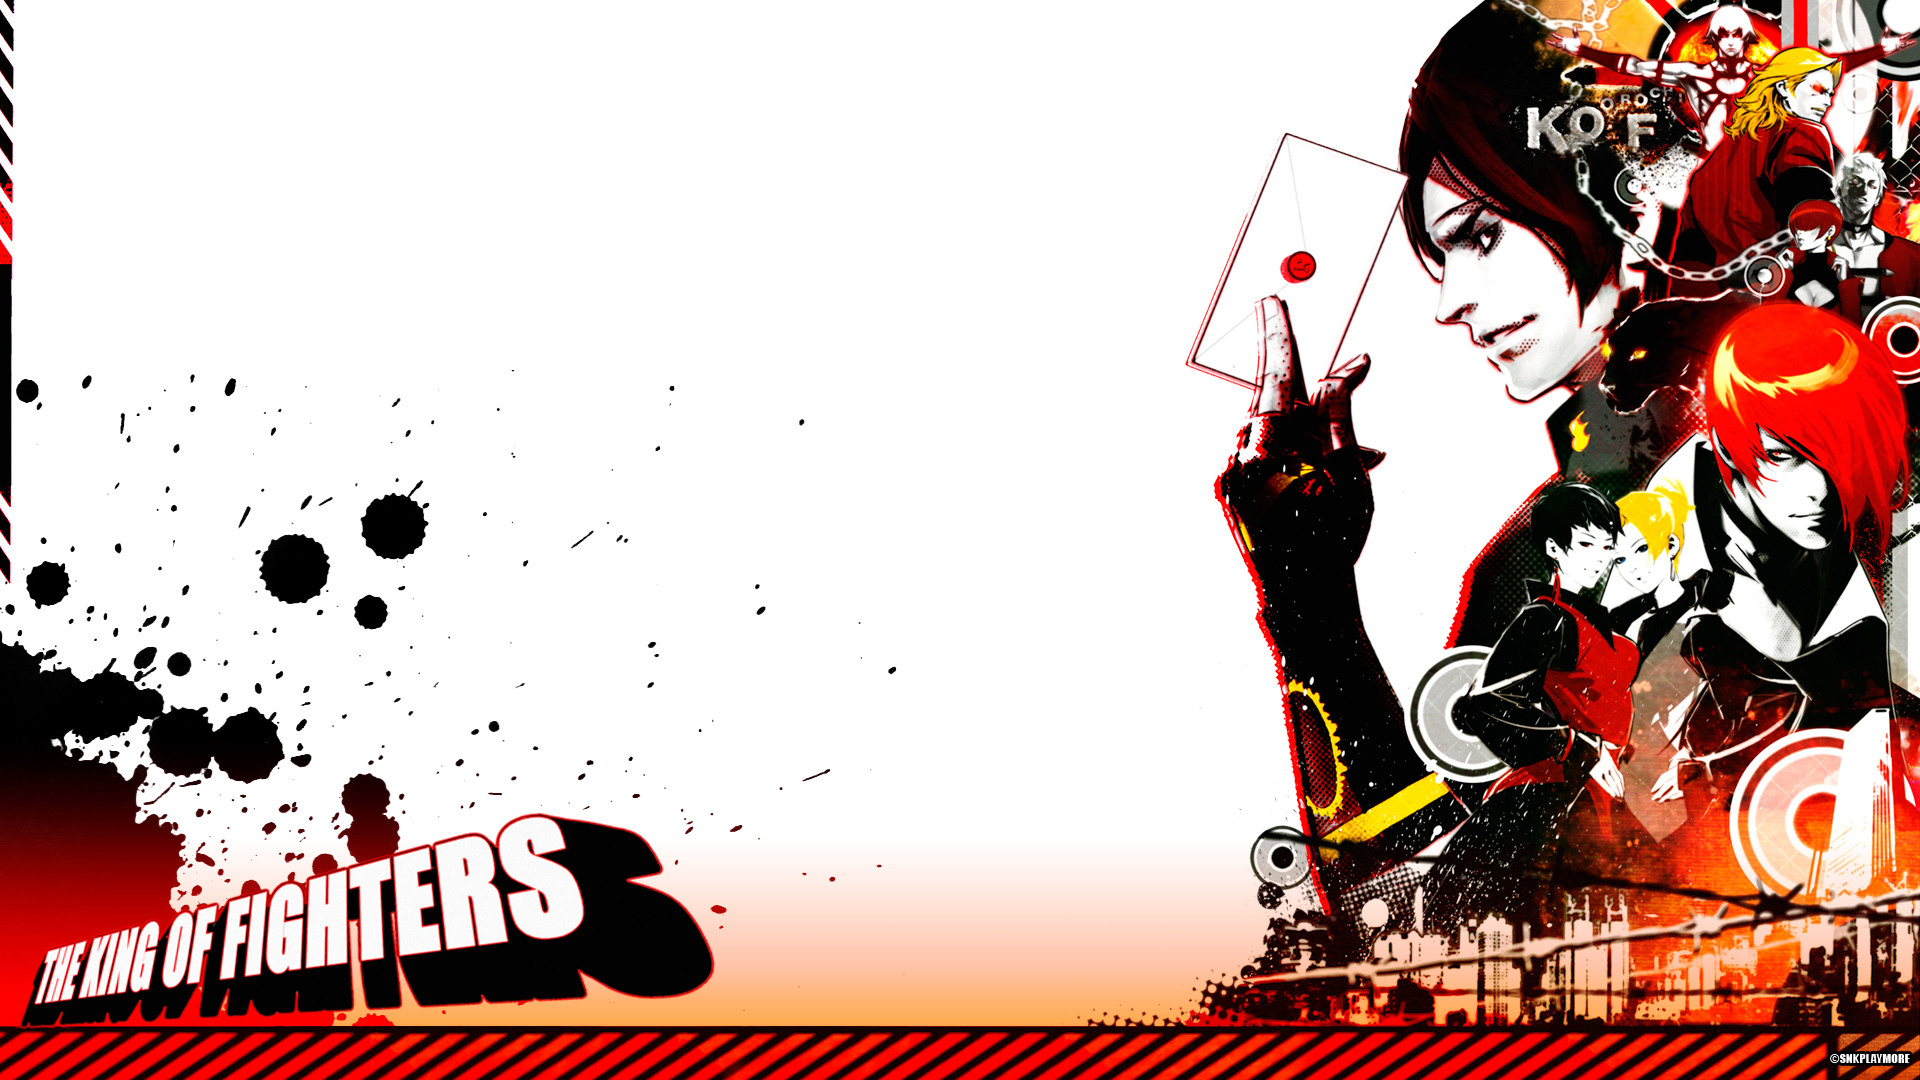 1920x1080 View Fullsize King of Fighters Image